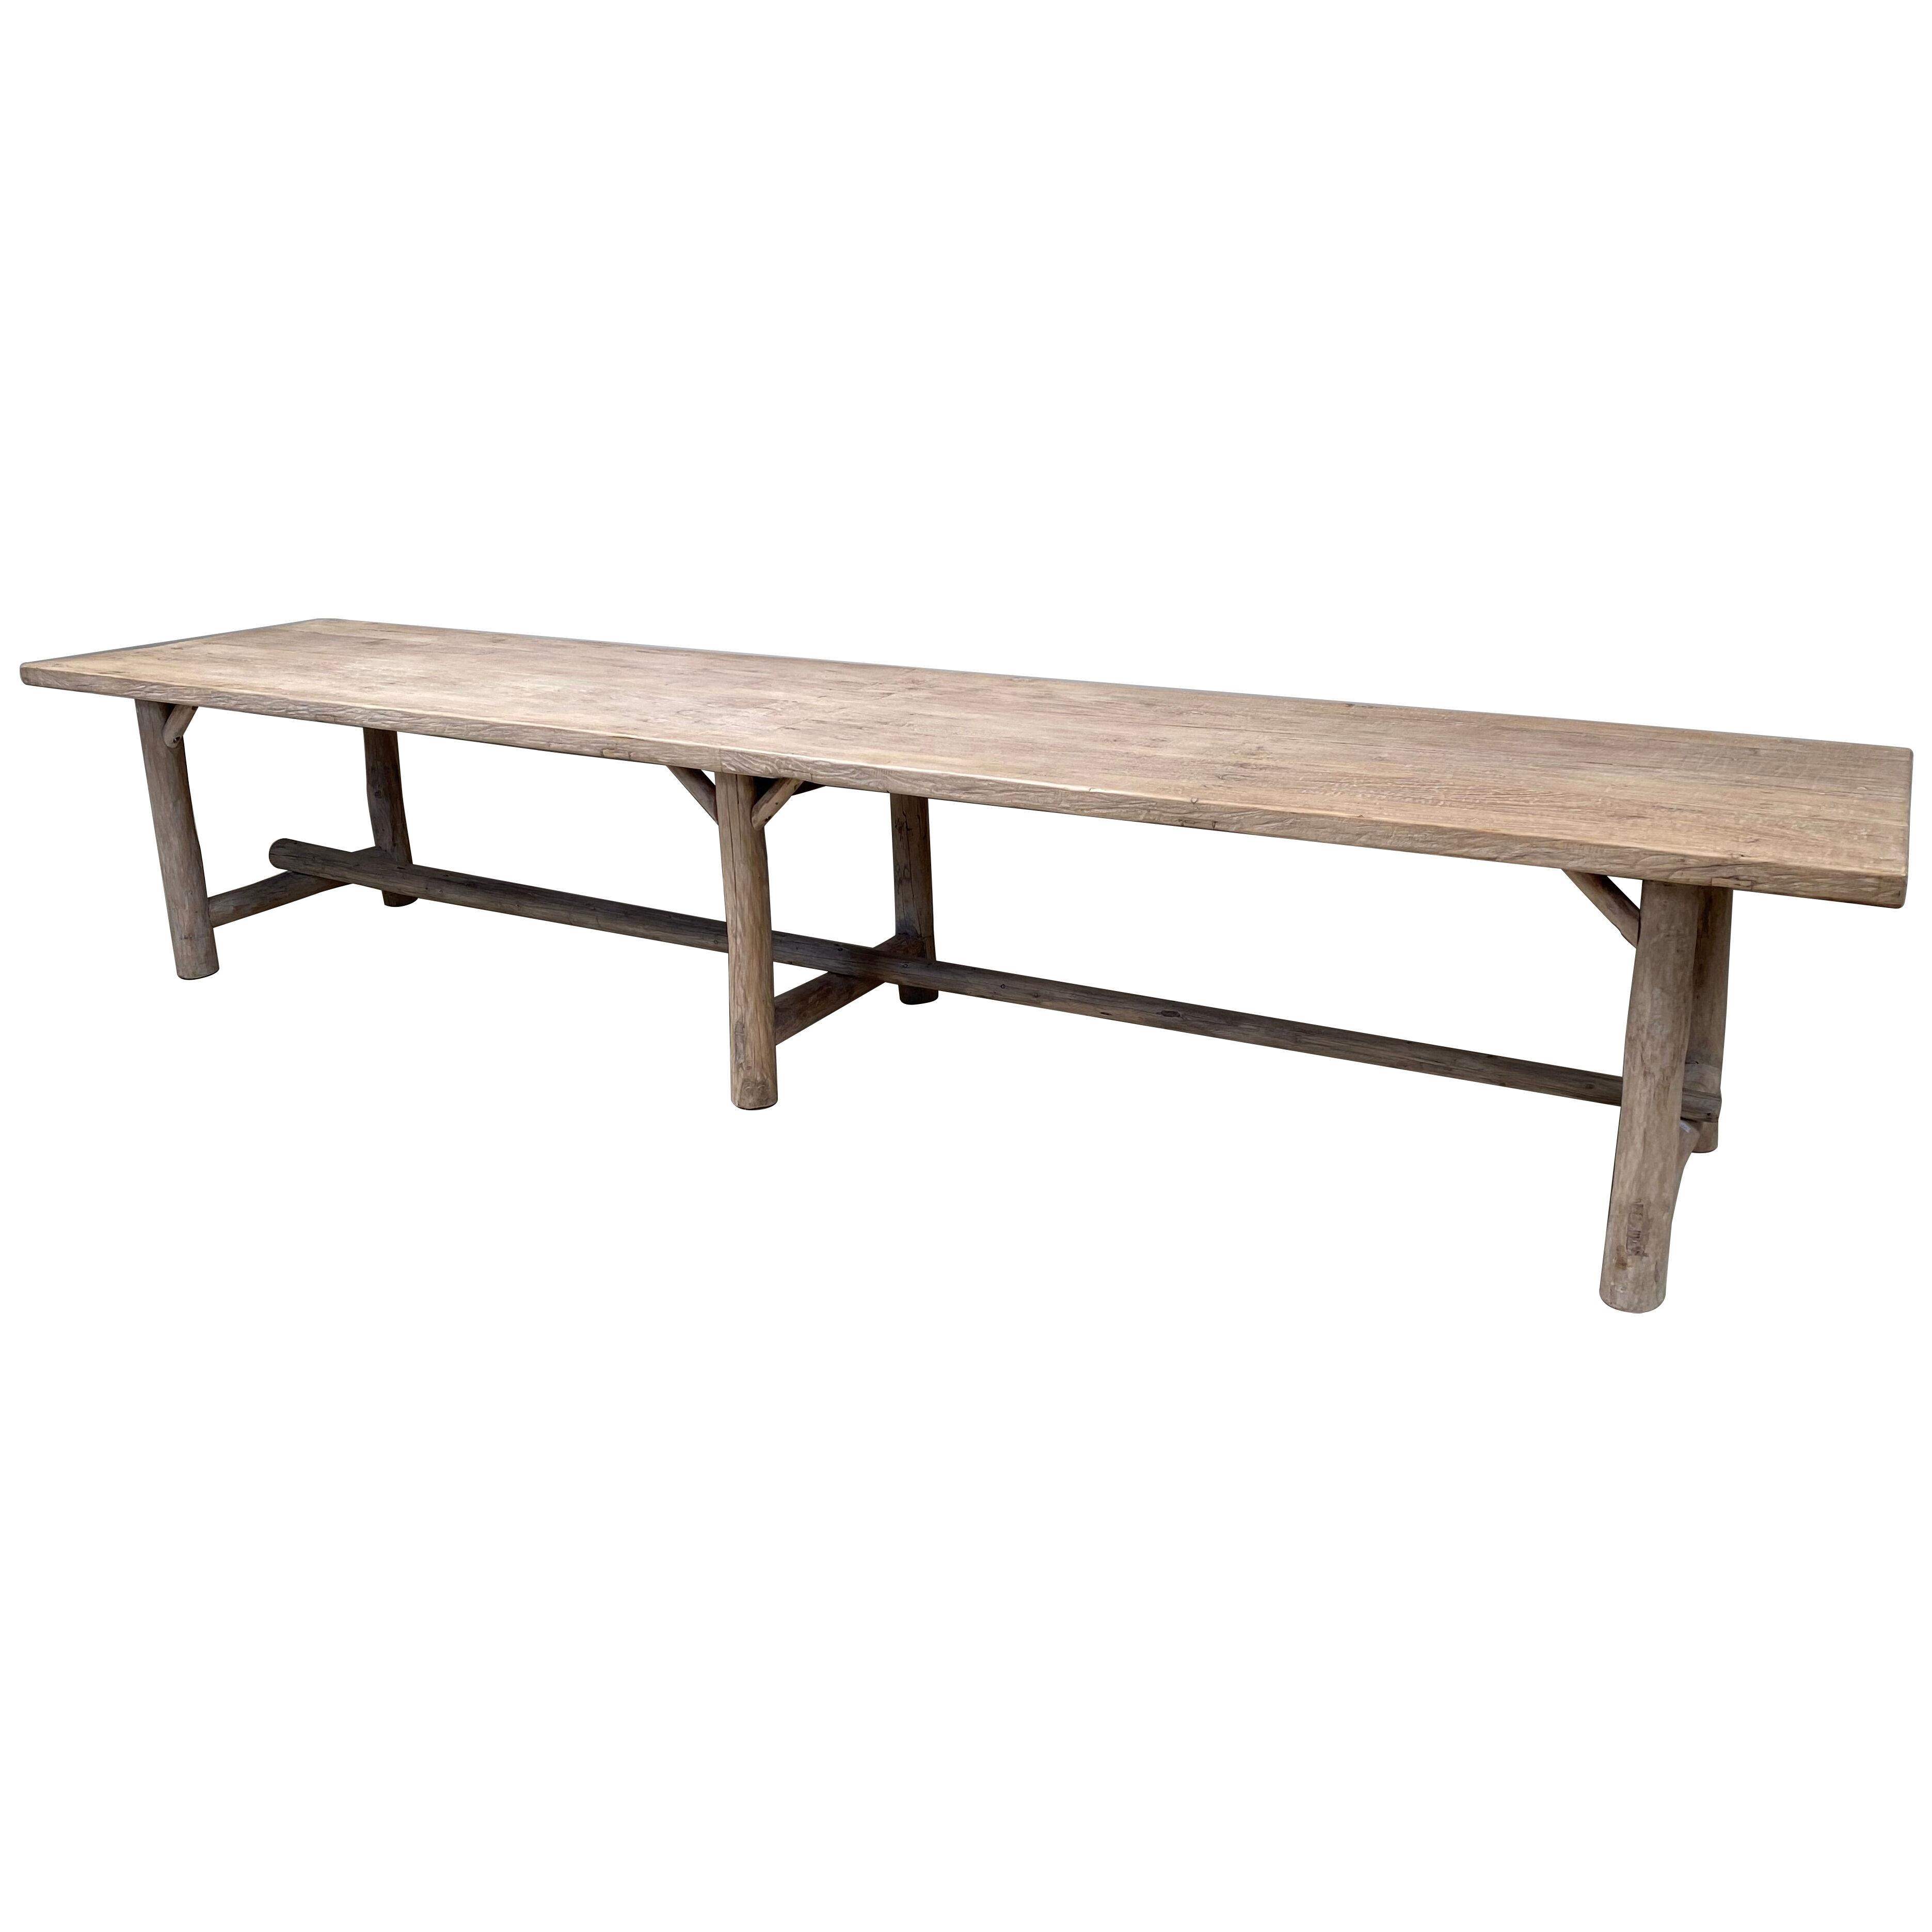 Huge,Rustic and Brutalist Dining Table in Bleached Elm Wood